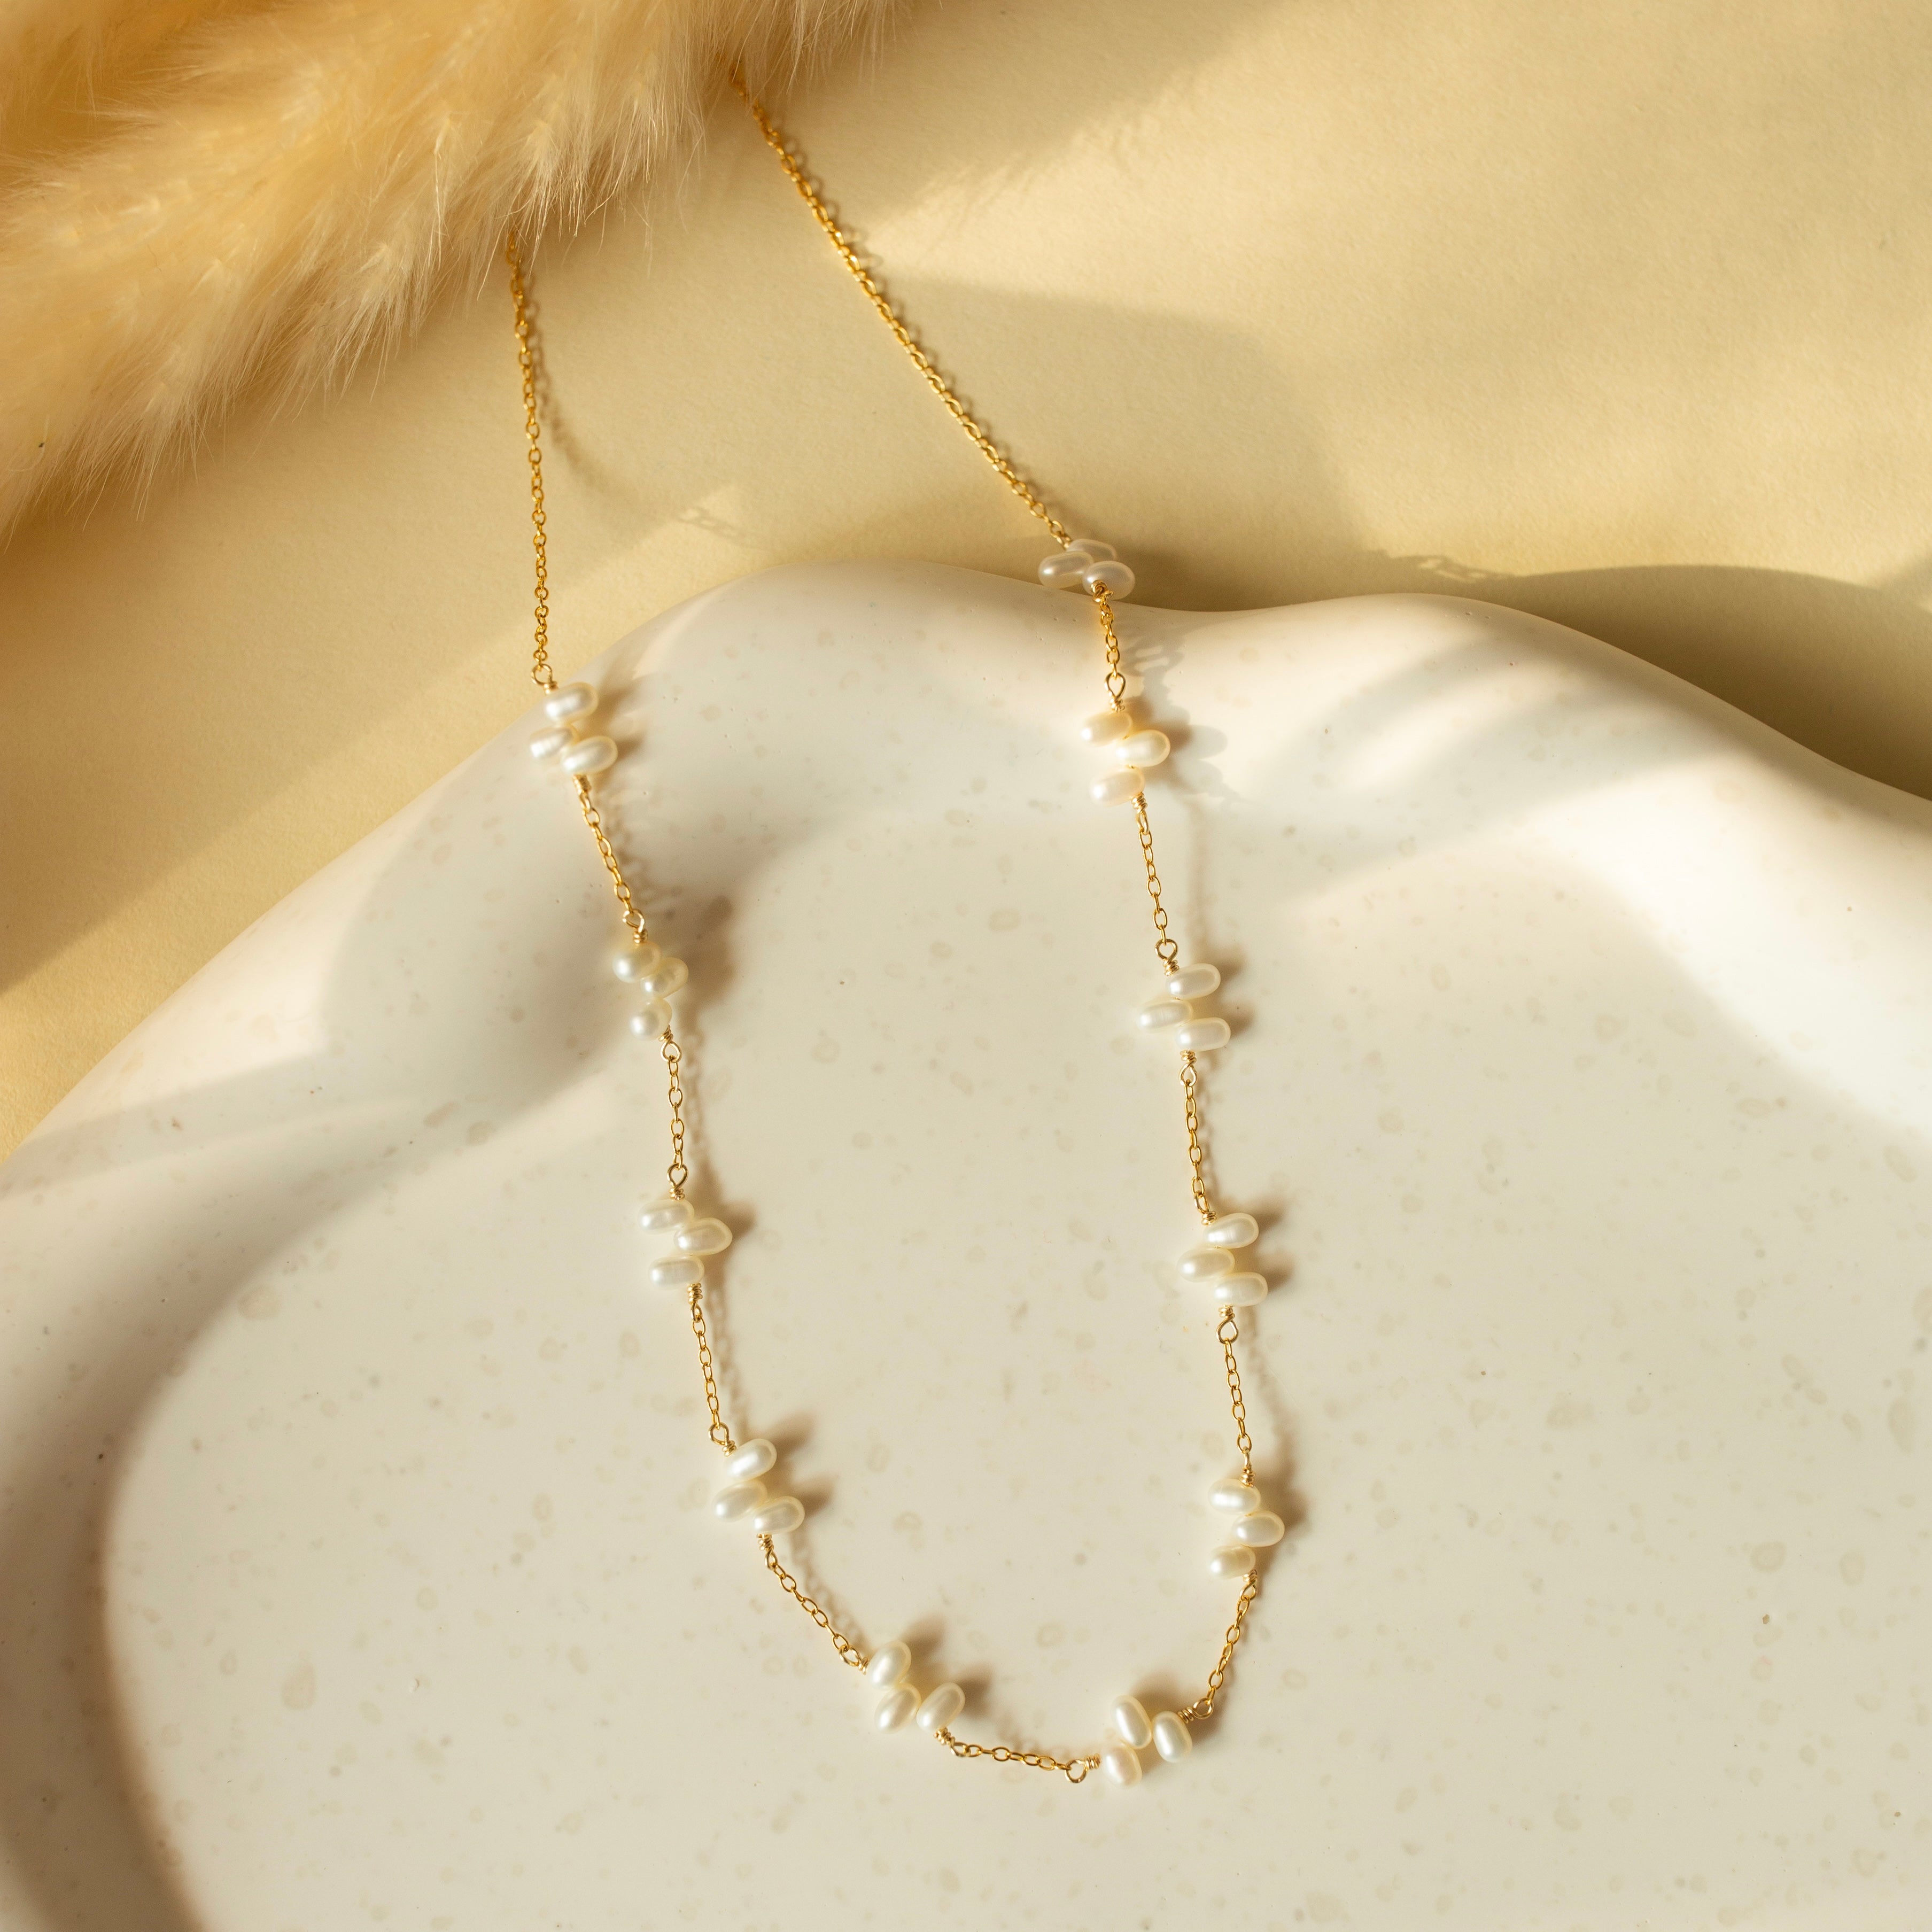 Freshwater Bead Pearl Necklace with 14k Gold-Plated Chain